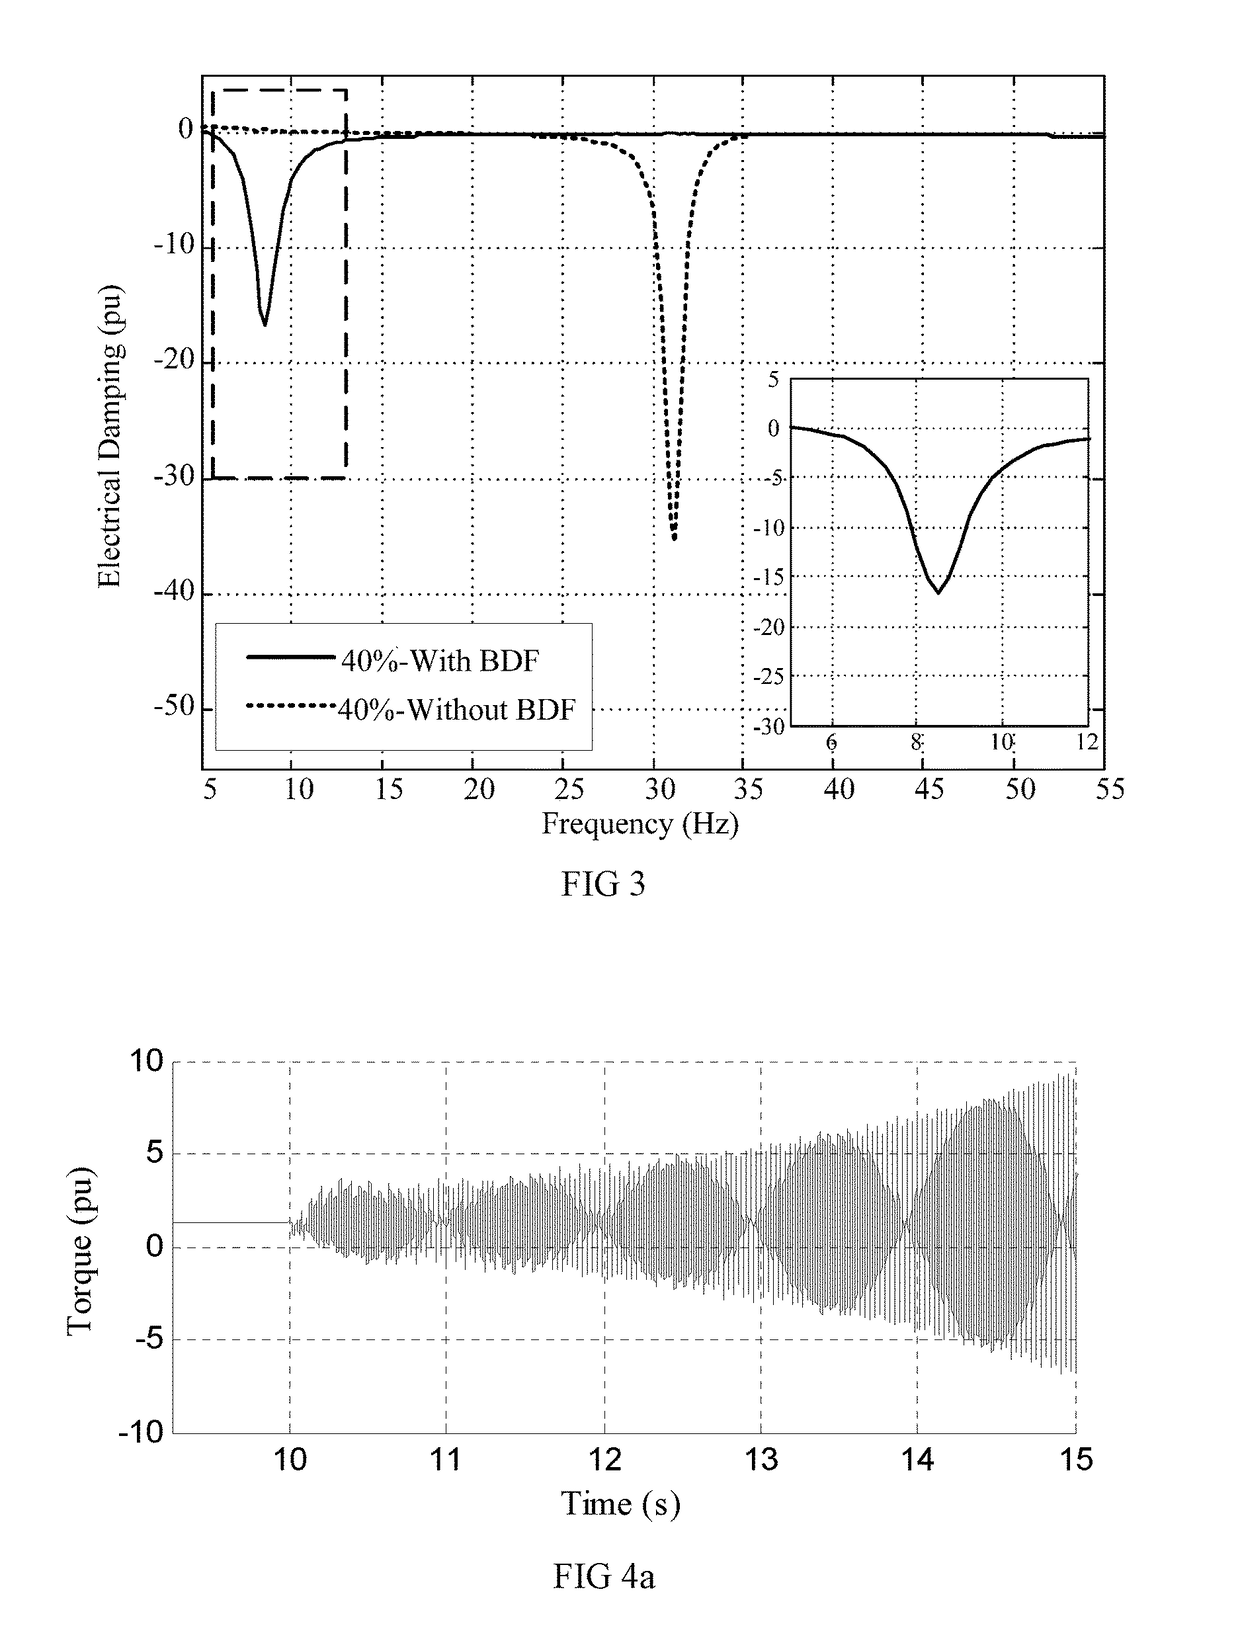 A parameter tuning approach for bypass damping filter to suppress subsynchronous resonance in power systems